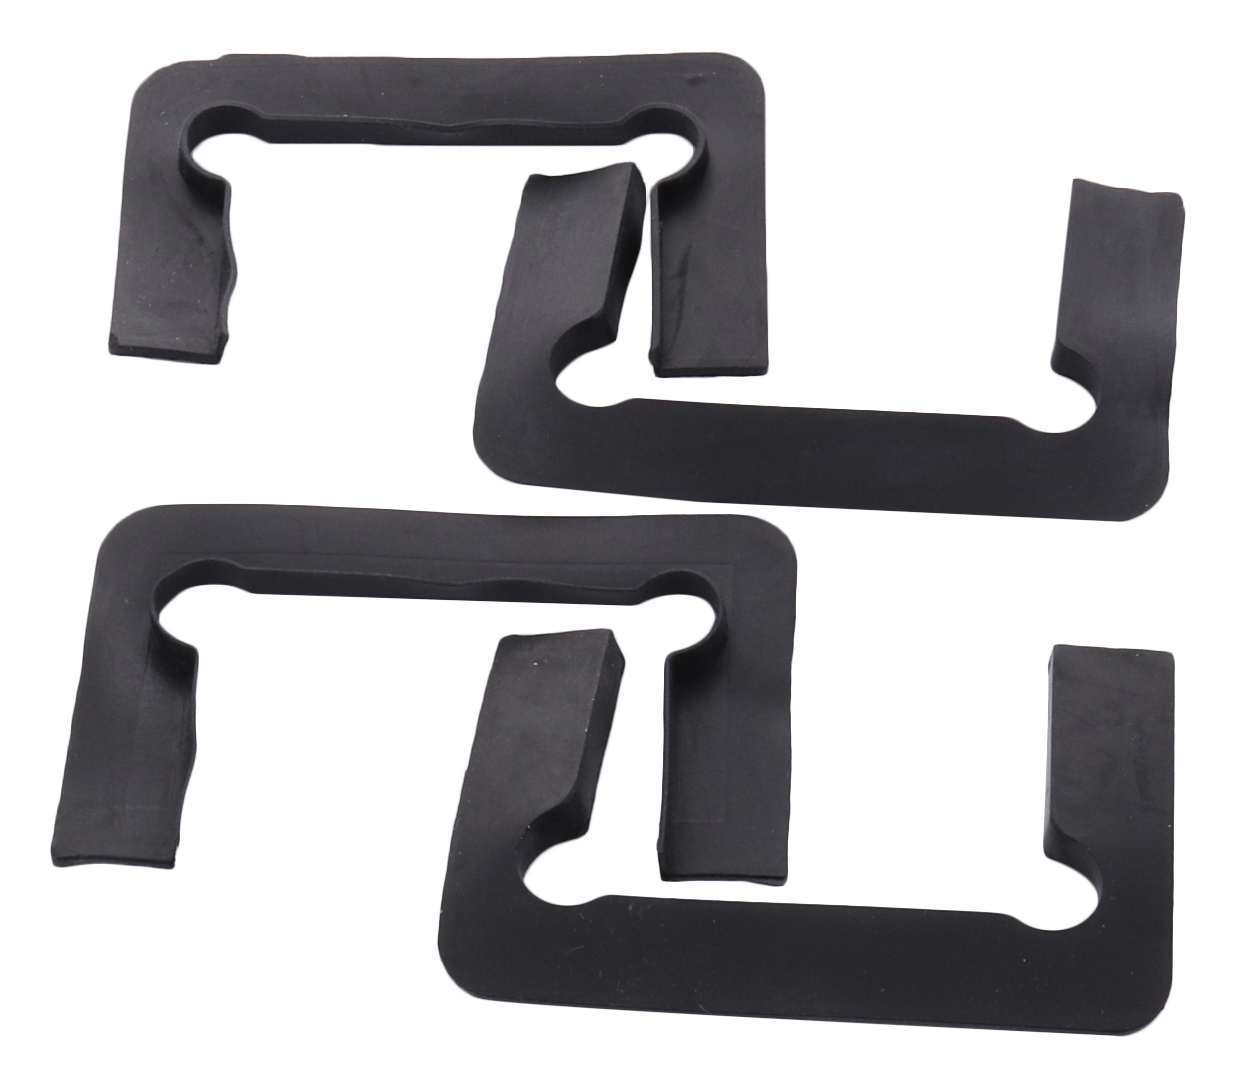 C.R. Laurence CRL P1NGASK Black Gasket Replacement Kit for Pinnacle Hinges